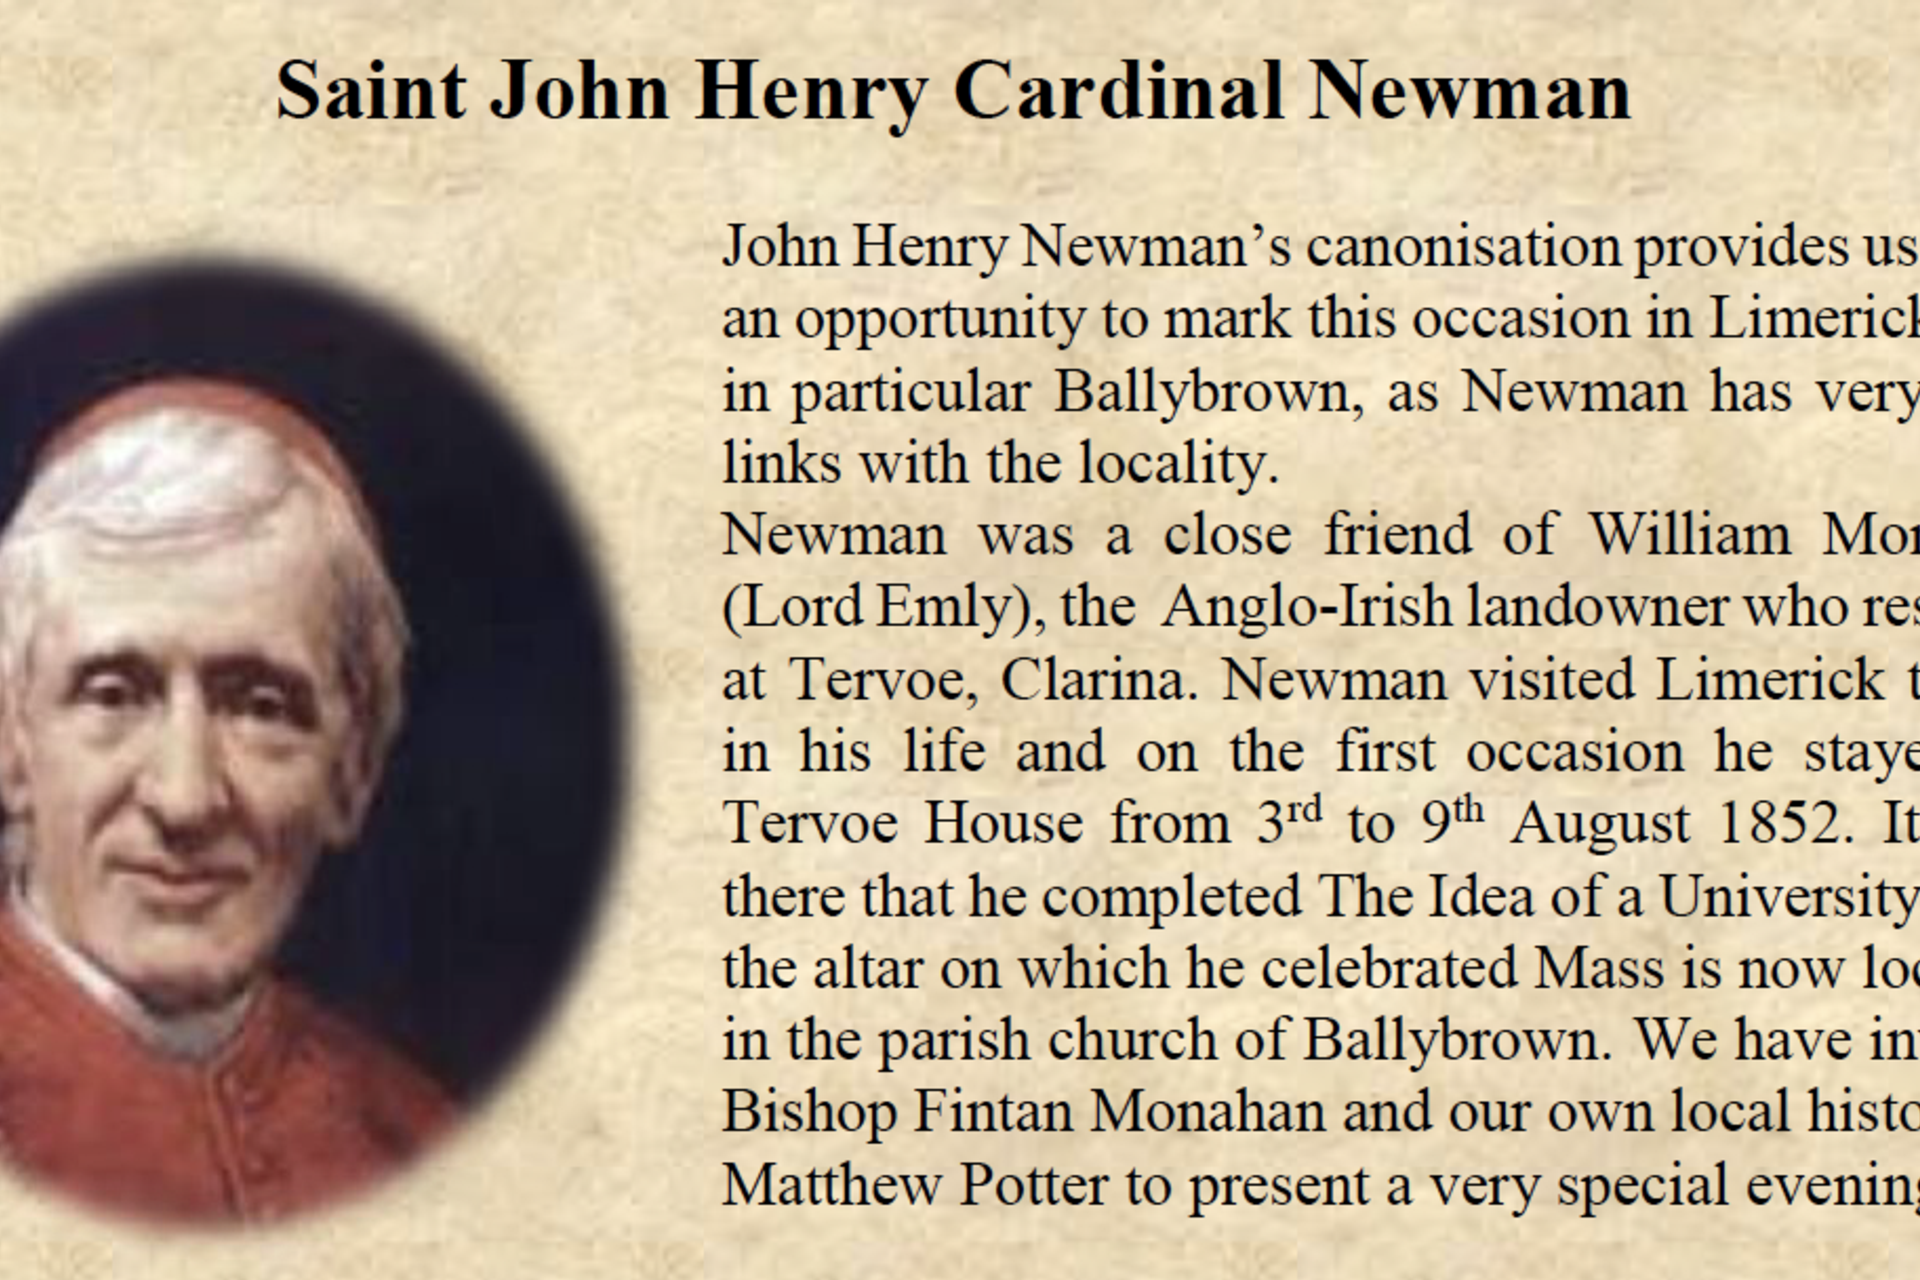 A very special evening to honour the canonisation of John Henry Newman